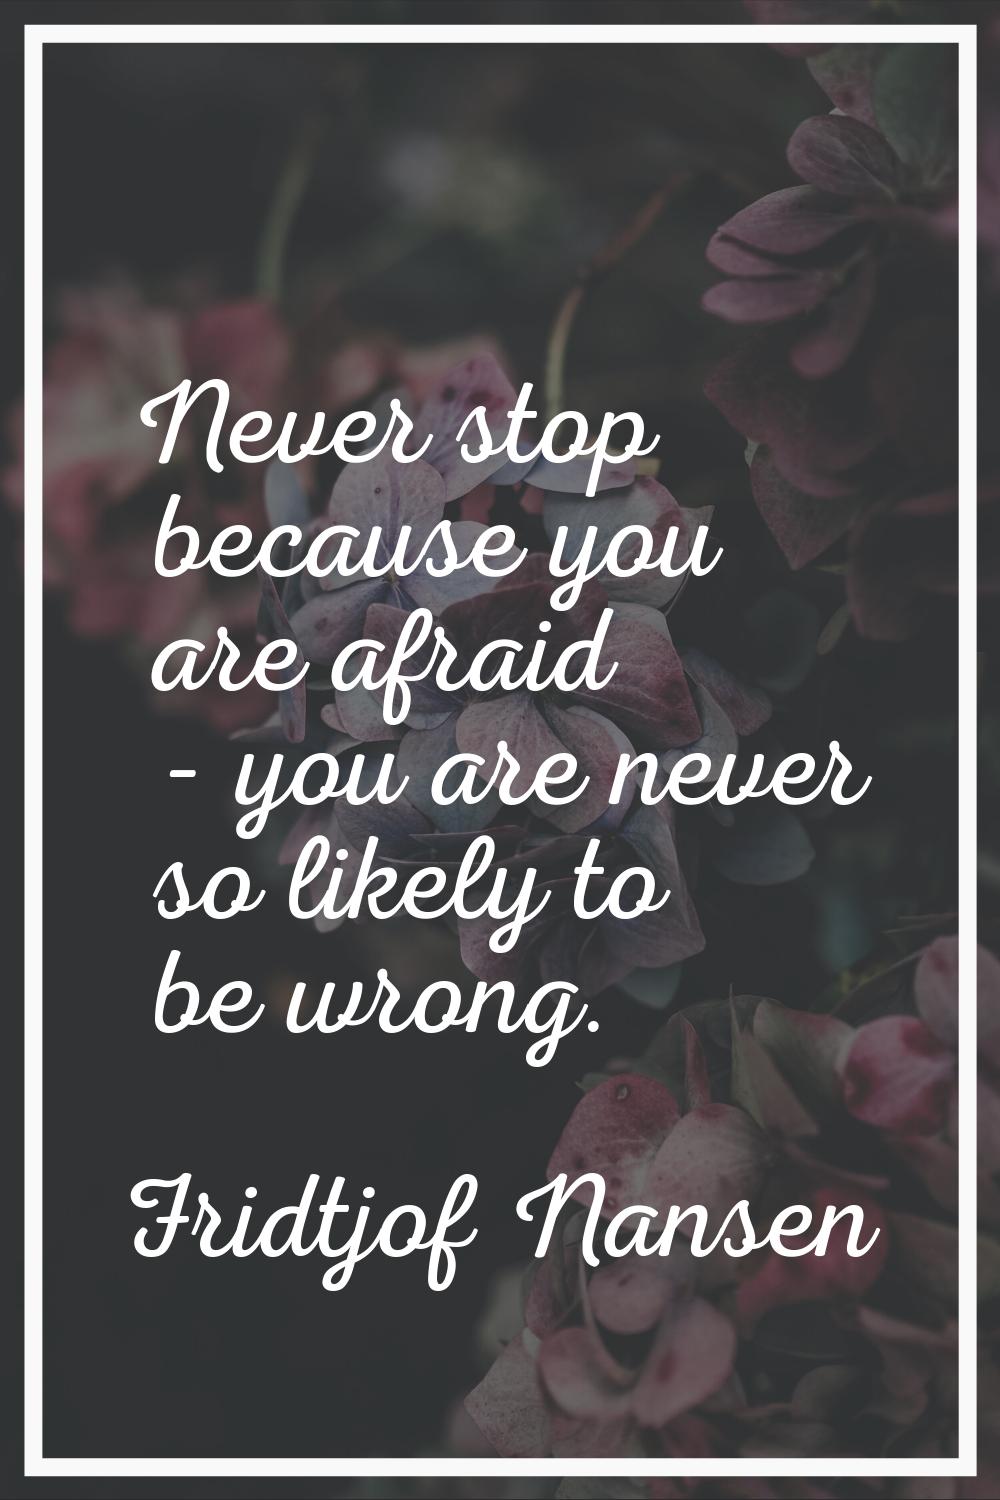 Never stop because you are afraid - you are never so likely to be wrong.